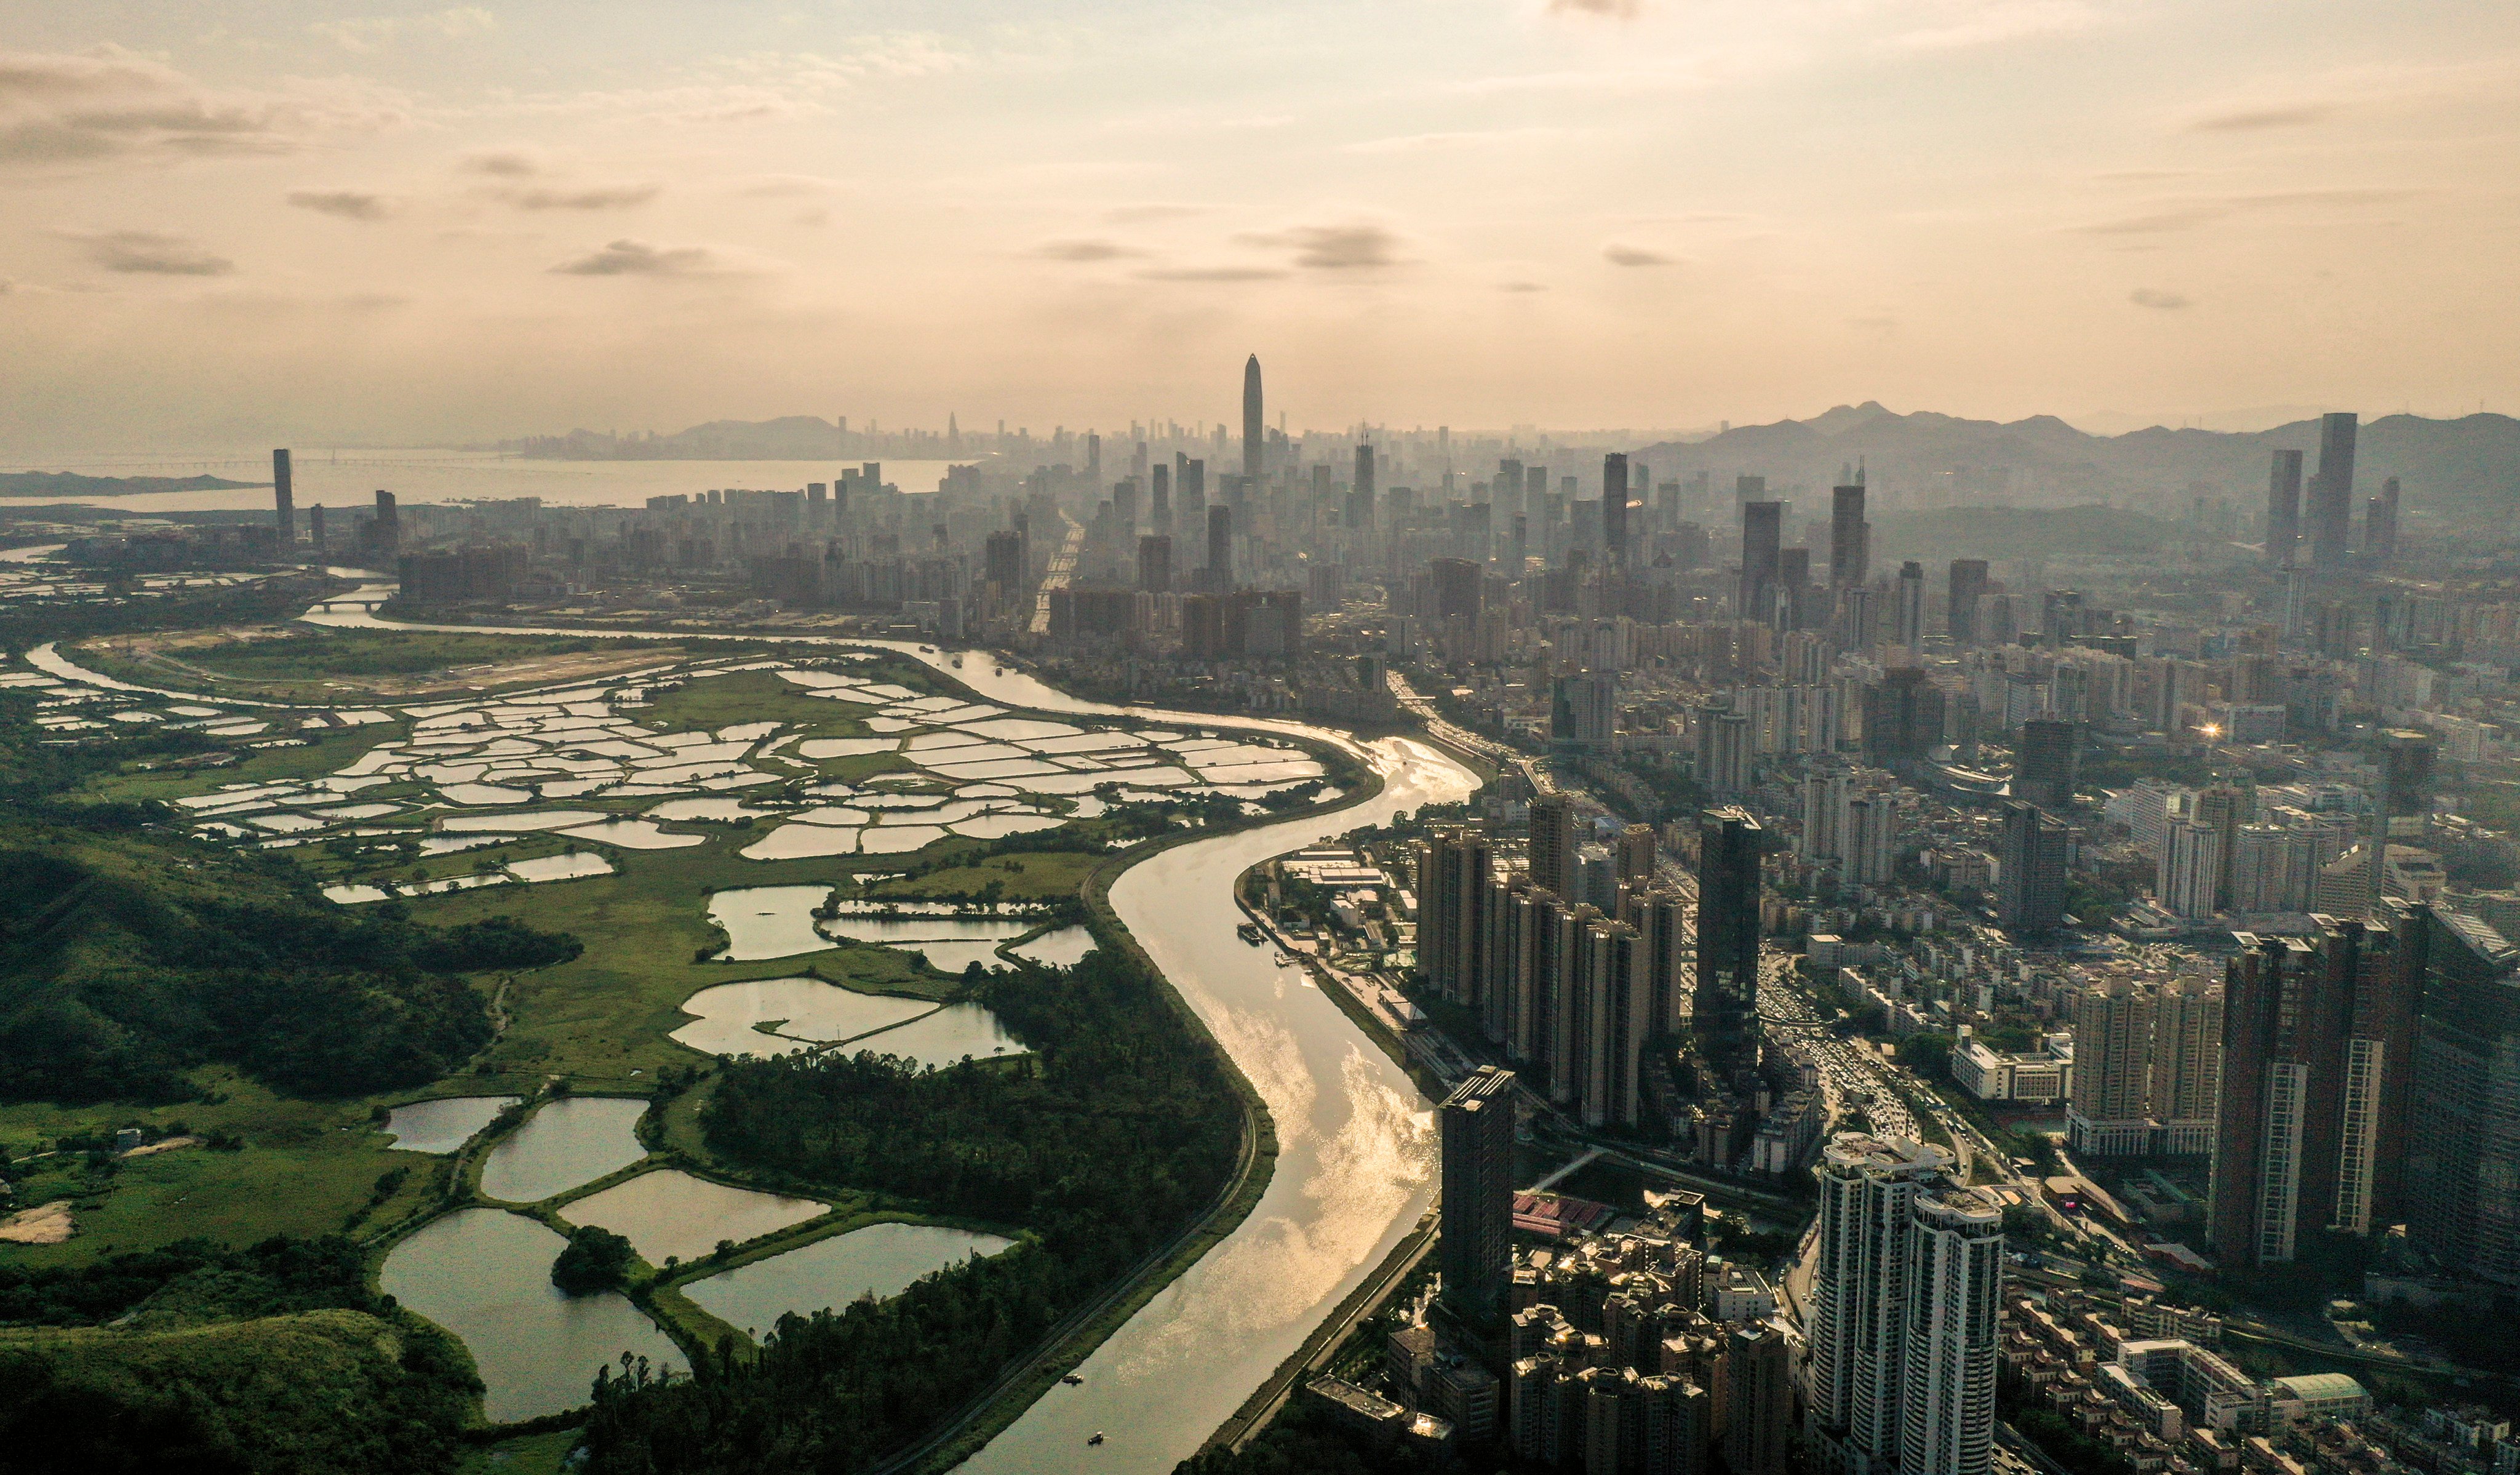 The Shenzhen skyline against China’s Greater Bay Area. Photo: Martin Chan